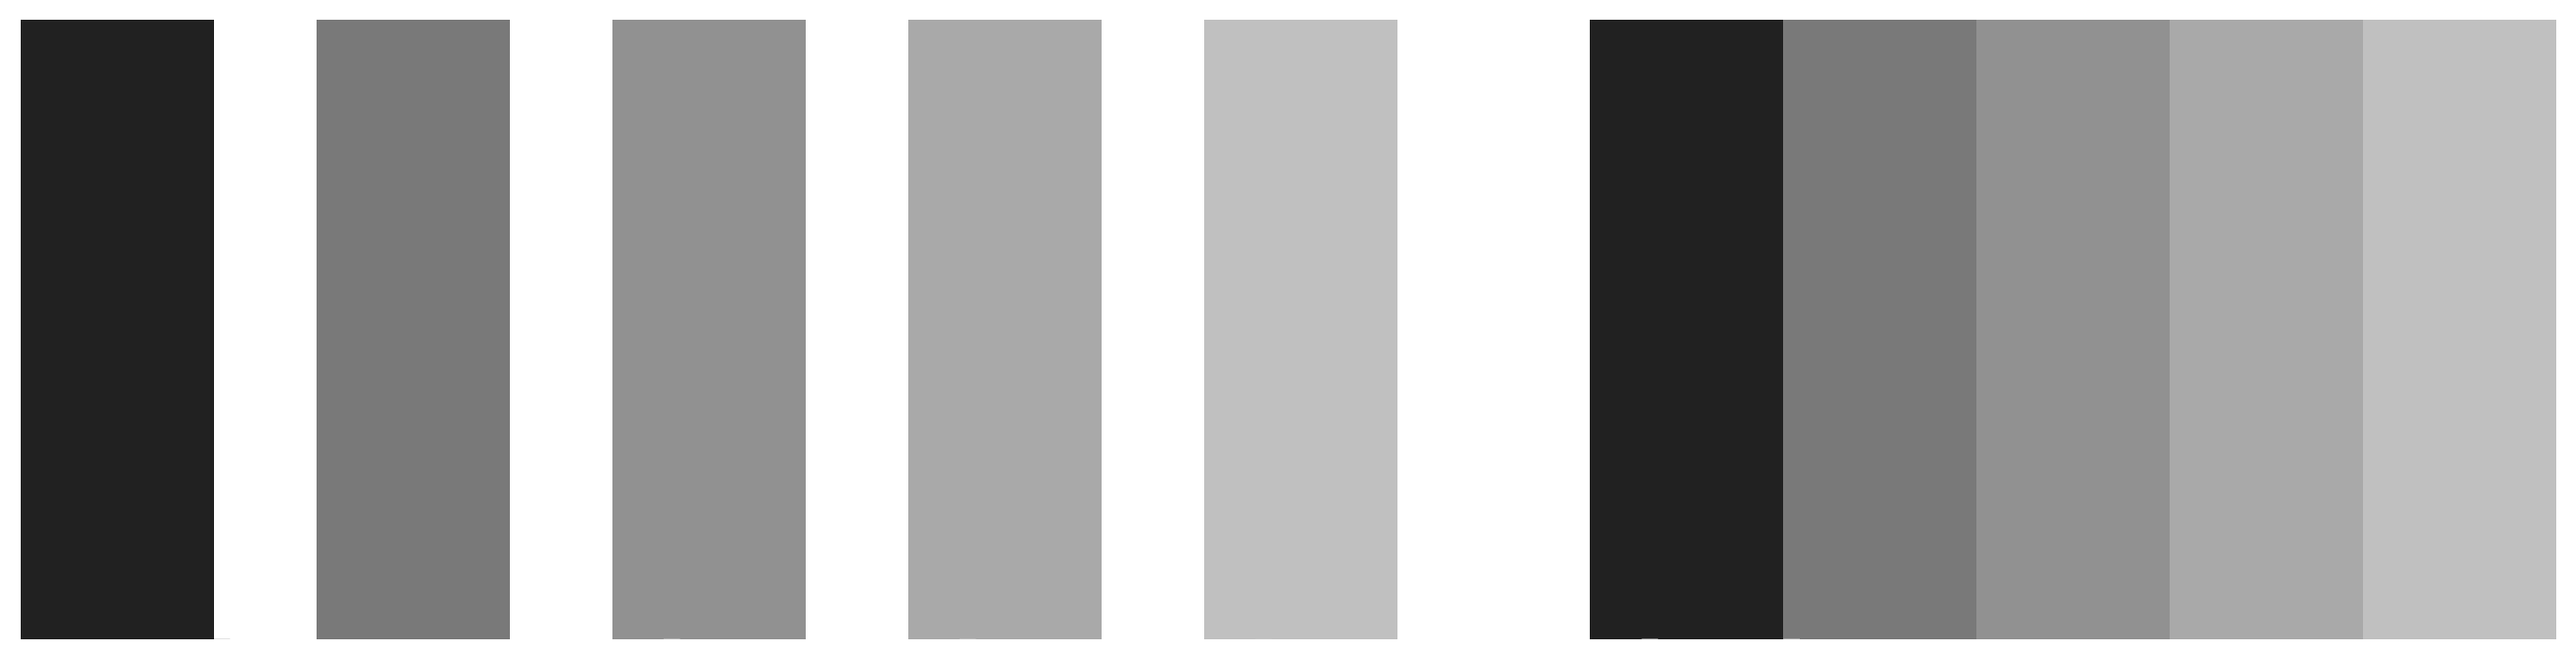 Mach bands. On the left side, five grey bars are ordered from dark to light, with gaps between them. On the right side, the bars have no gap between them. The brightness or luminance of the corresponding bars is the same. However, when the bars touch, the dark areas seem darker and the light areas lighter.